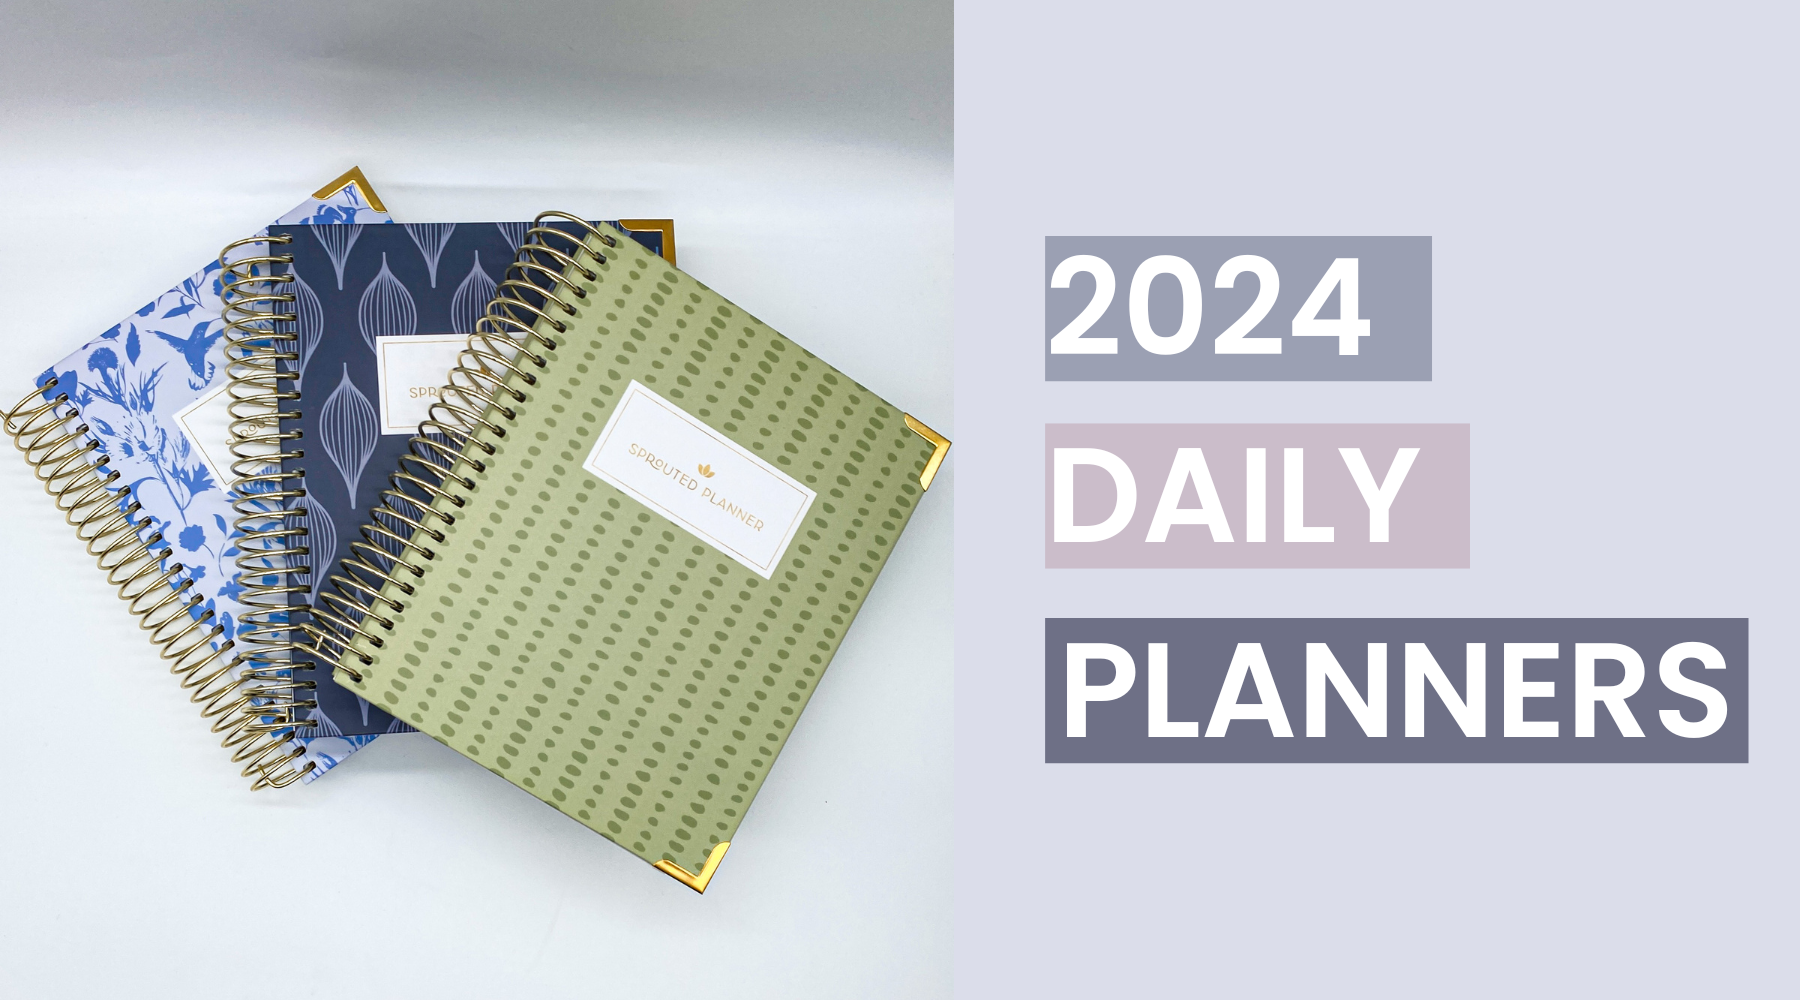 2024 Daily Planner Rundown - Sprouted Planner